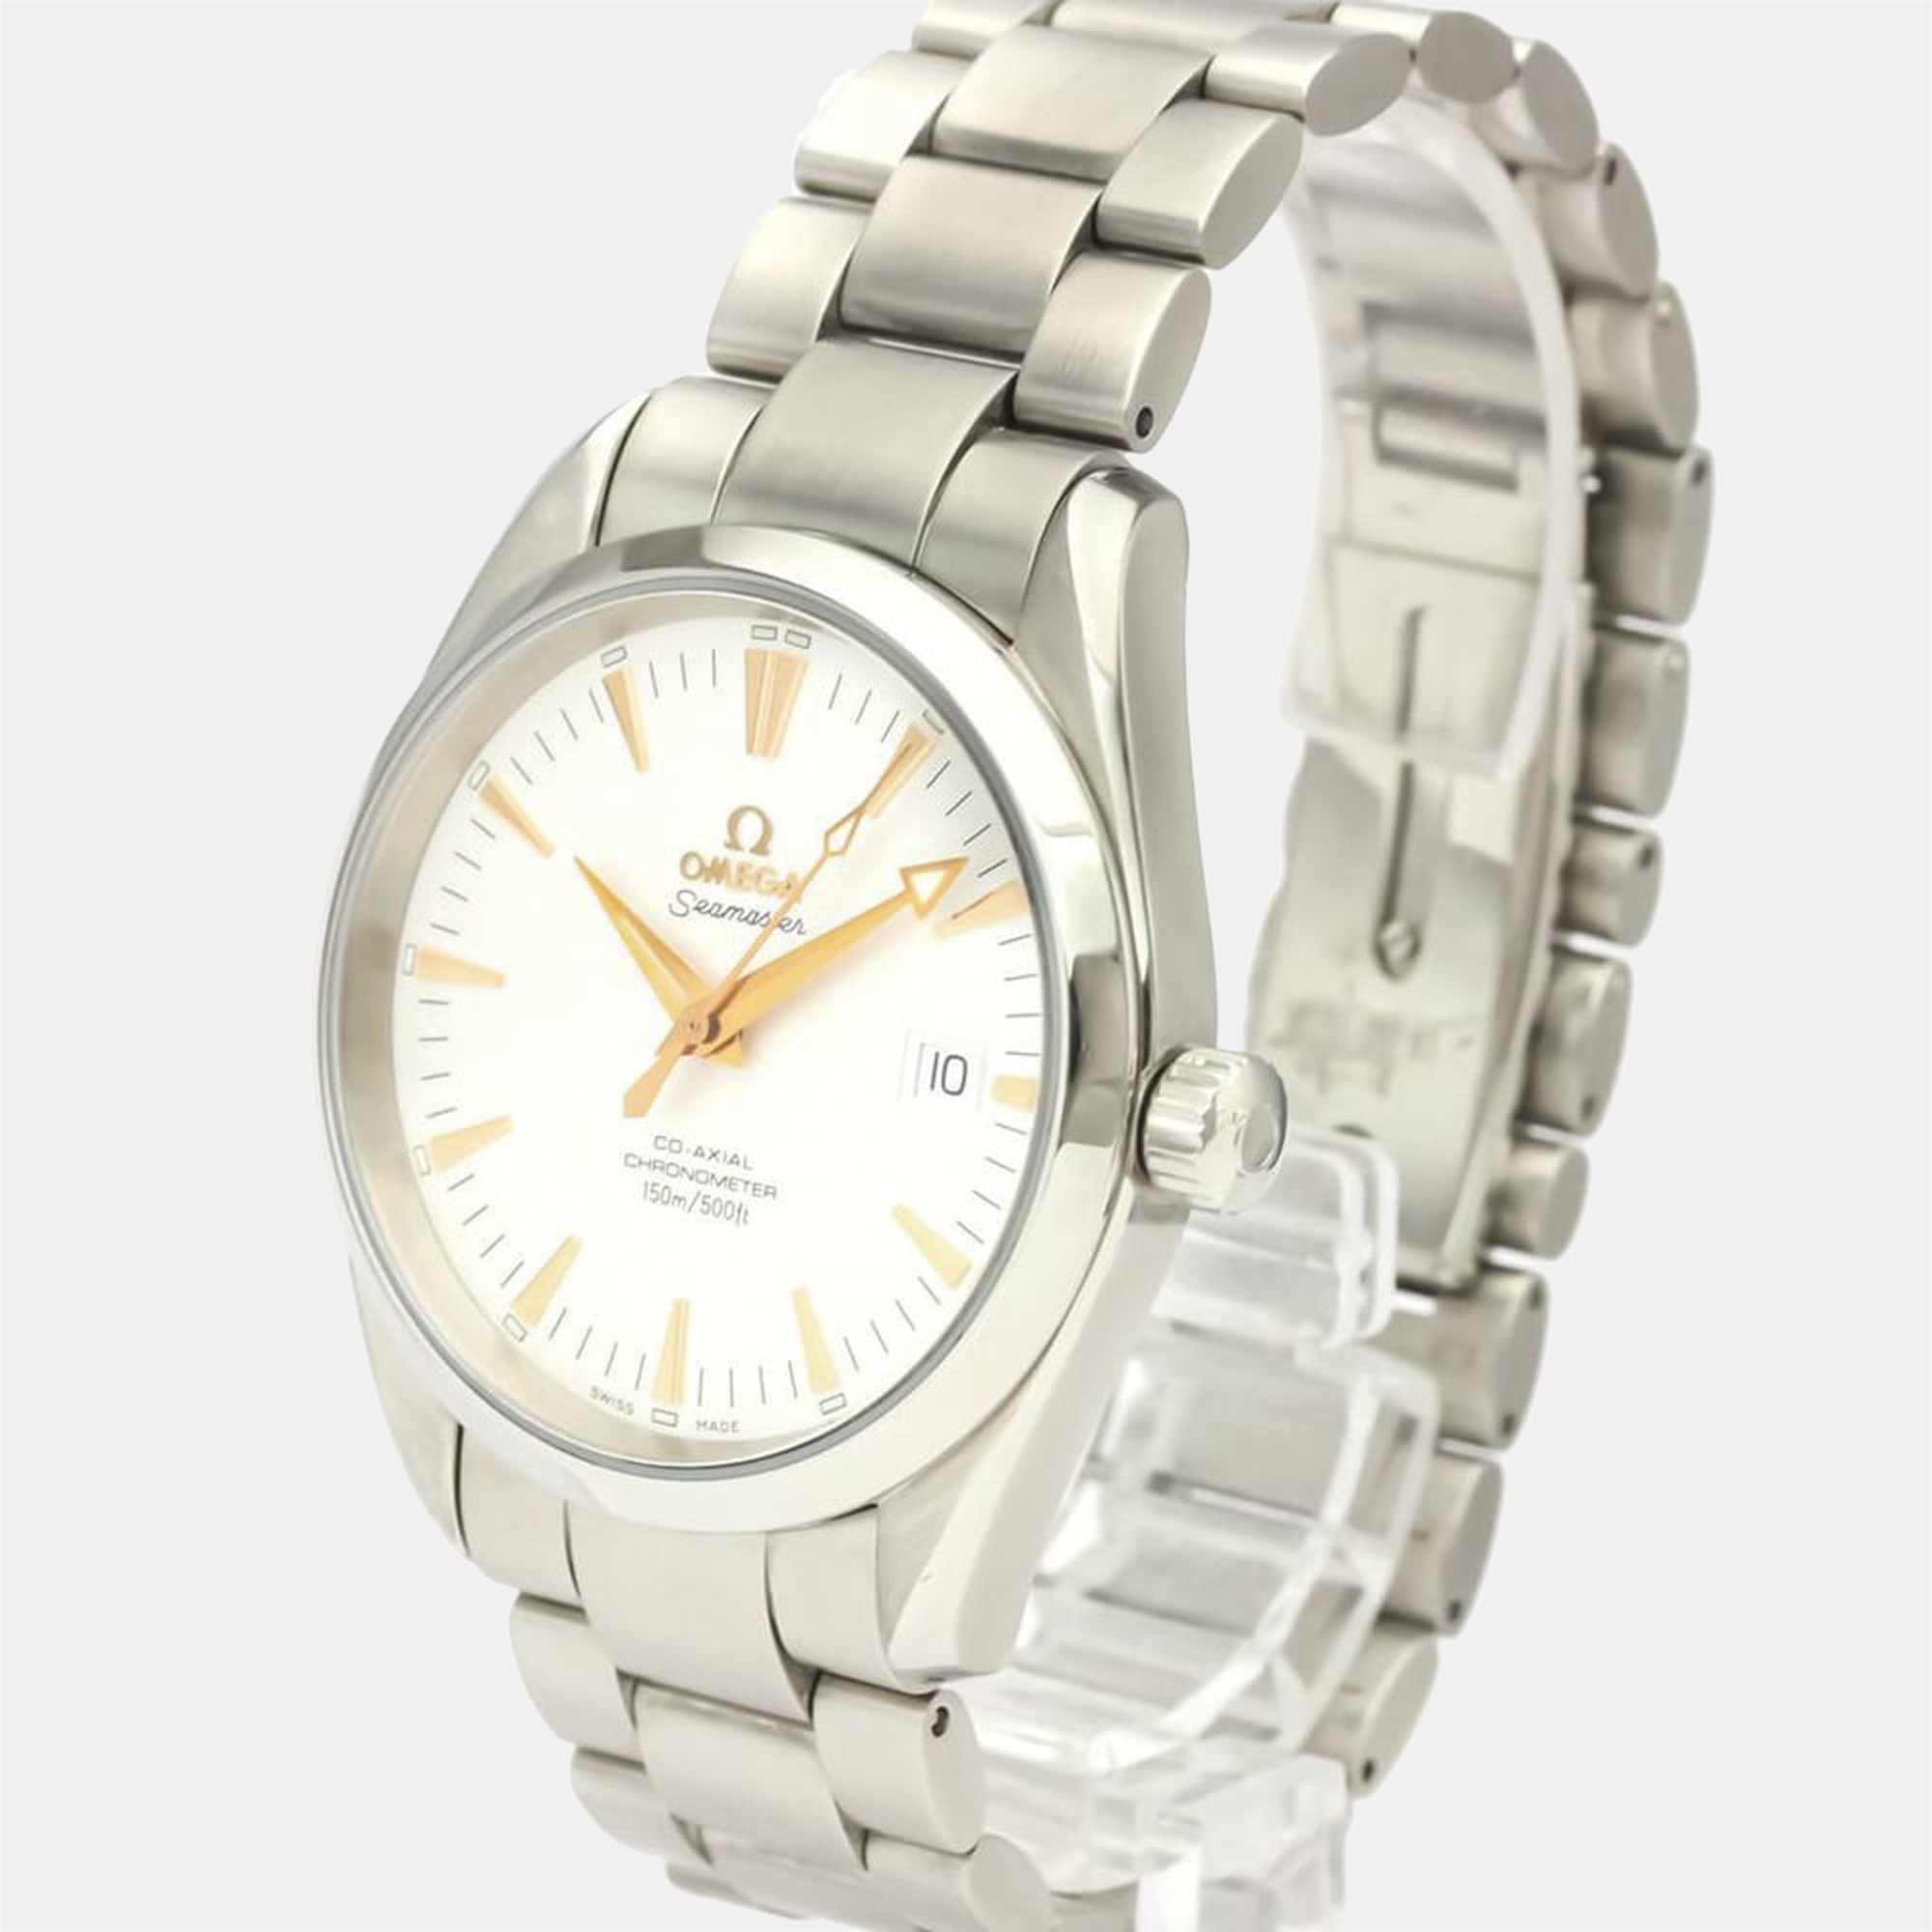 Pre-owned Omega White Stainless Steel Seamaster Aqua Terra 2503.34 Automatic Men's Wristwatch 39 Mm